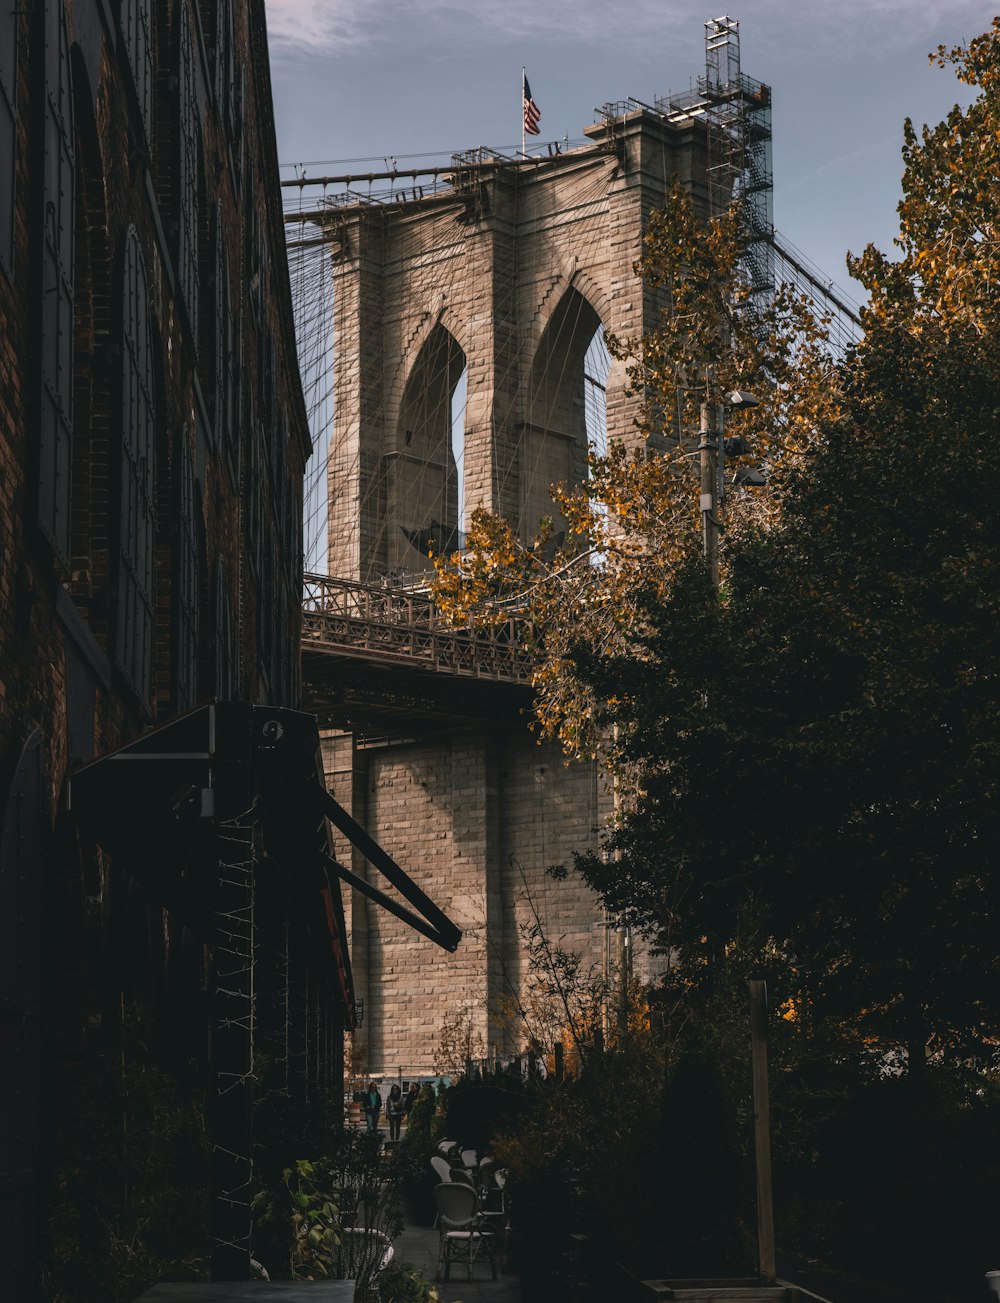 a view of the brooklyn bridge from the side of a building